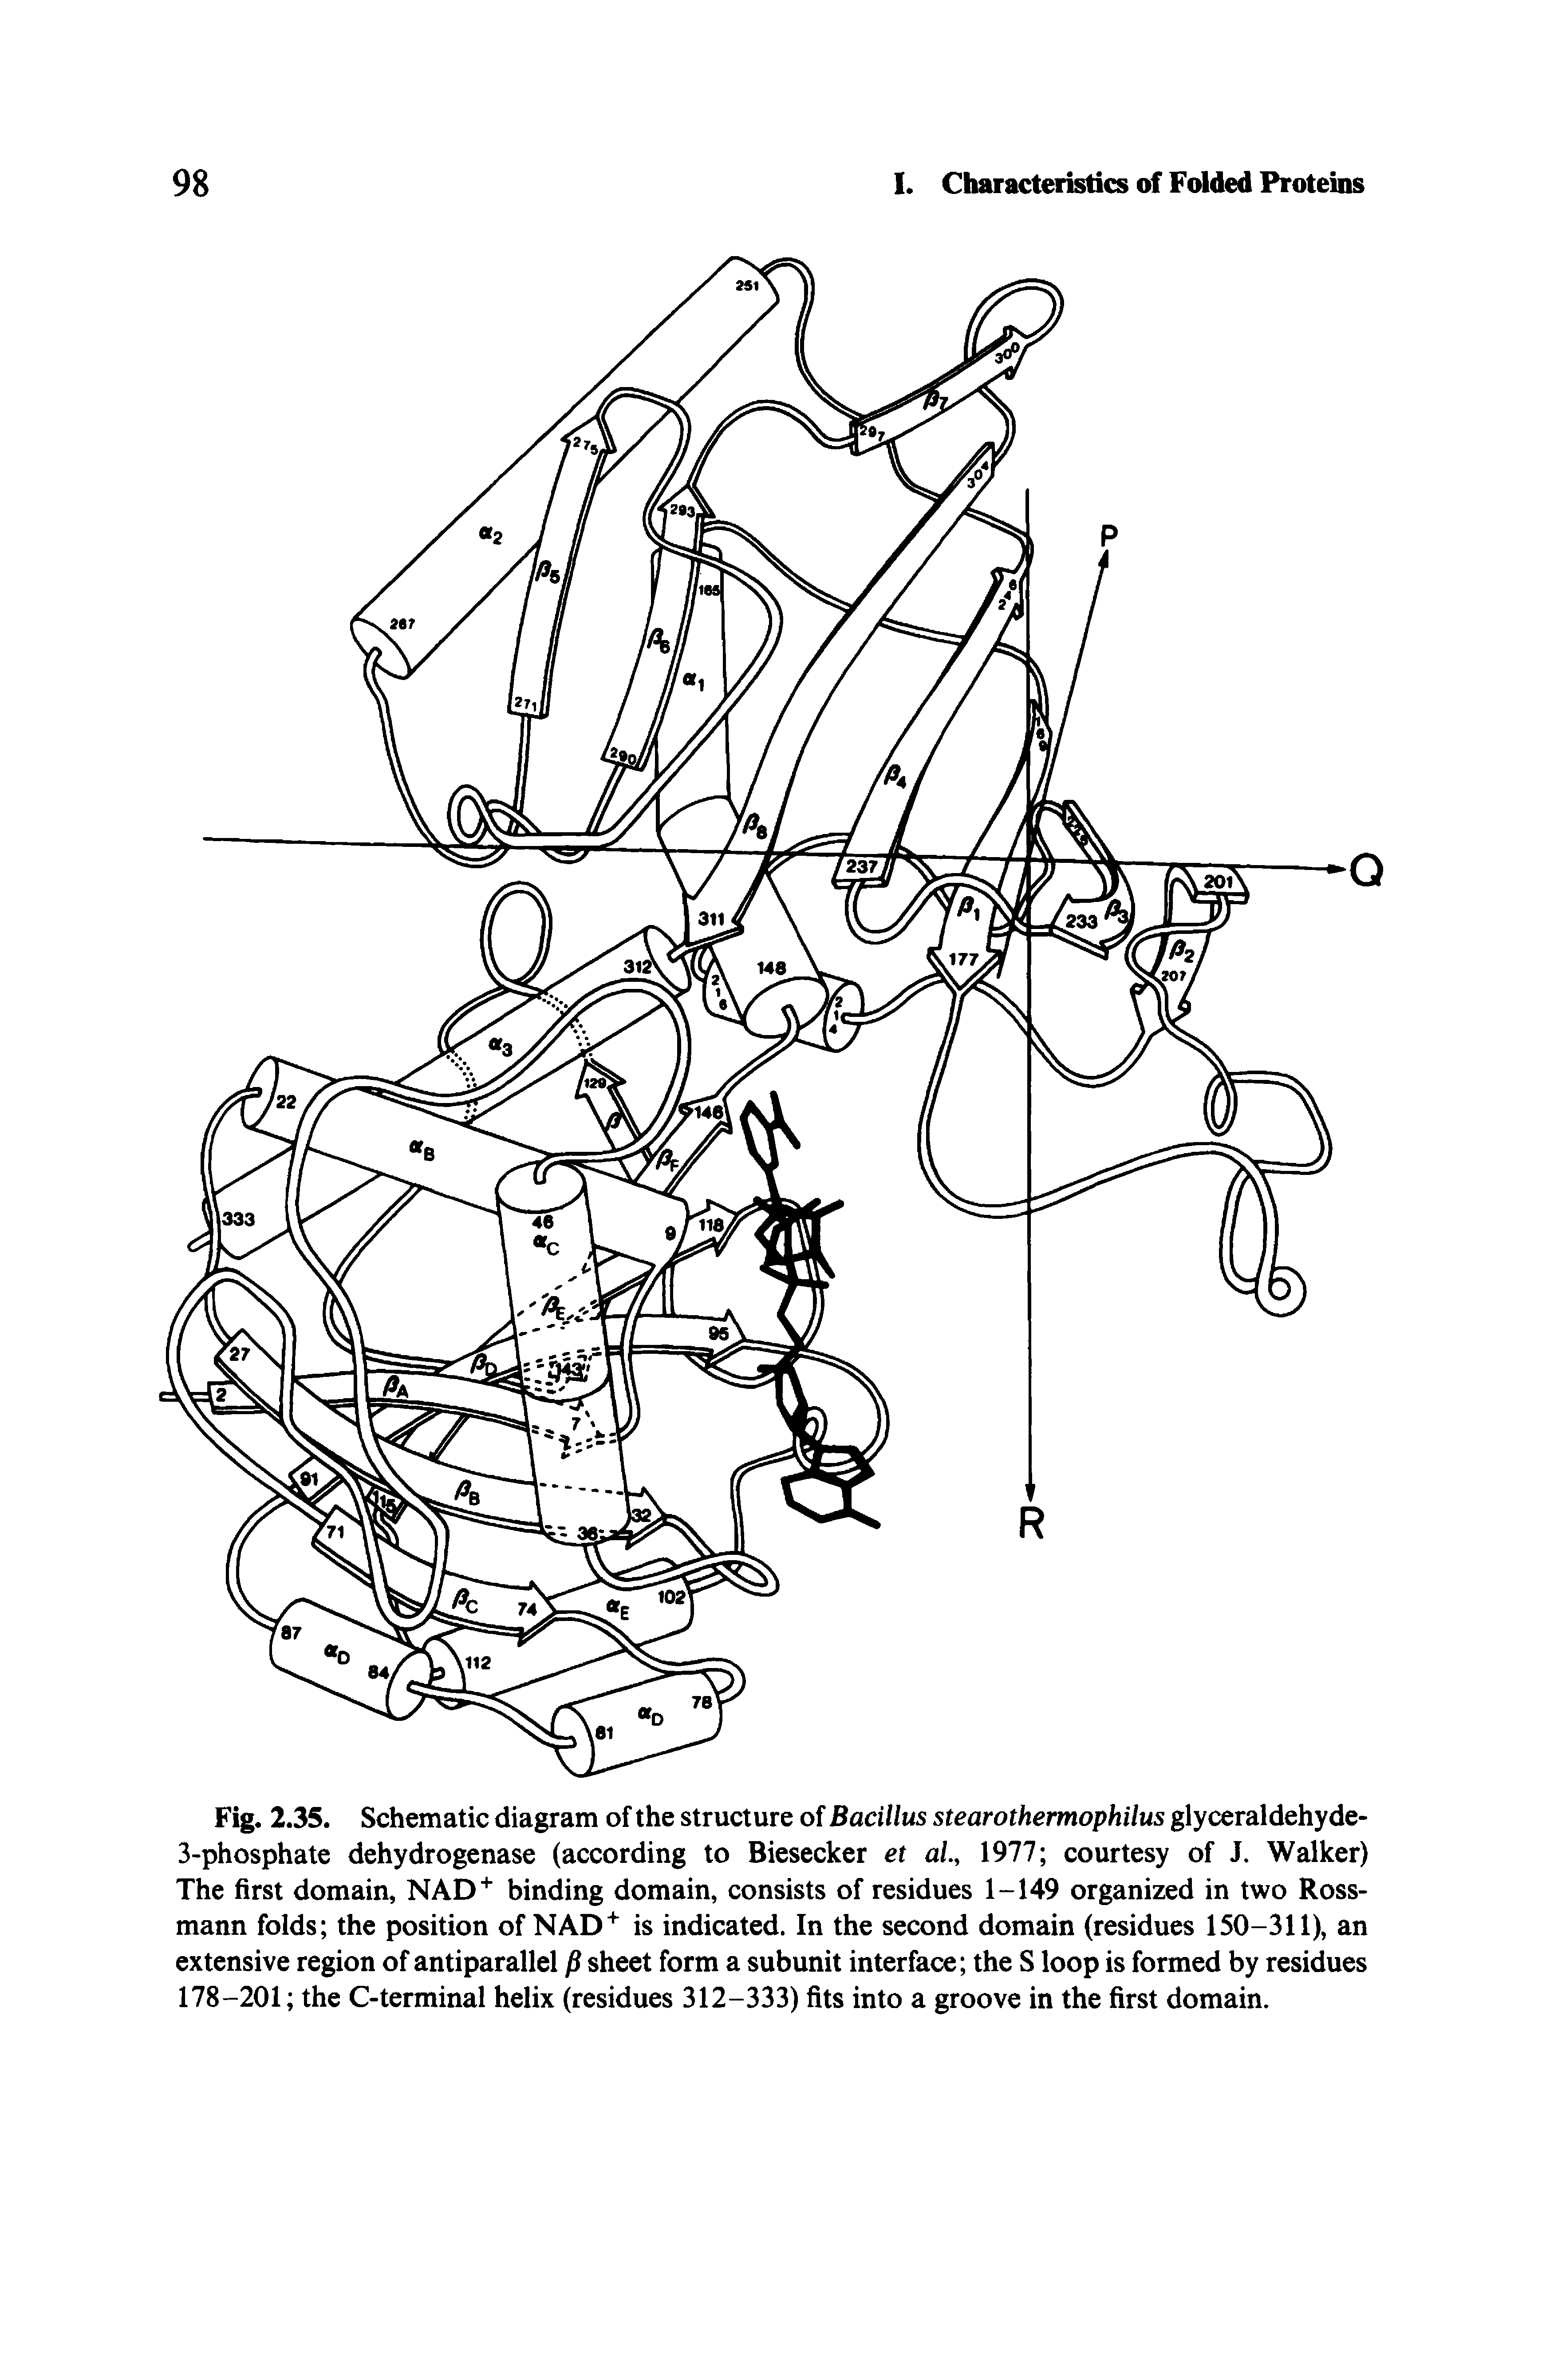 Fig. 2.35. Schematic diagram of the structure of Bacillus stearothermophilus glyceraldehyde-3-phosphate dehydrogenase (according to Biesecker et aL, 1977 courtesy of J. Walker) The first domain, NAD binding domain, consists of residues 1-149 organized in two Ross-mann folds the position of NAD is indicated. In the second domain (residues 150-311), an extensive region of antiparallel p sheet form a subunit interface the S loop is formed by residues 178-201 the C-terminal helix (residues 312-333) fits into a groove in the first domain.